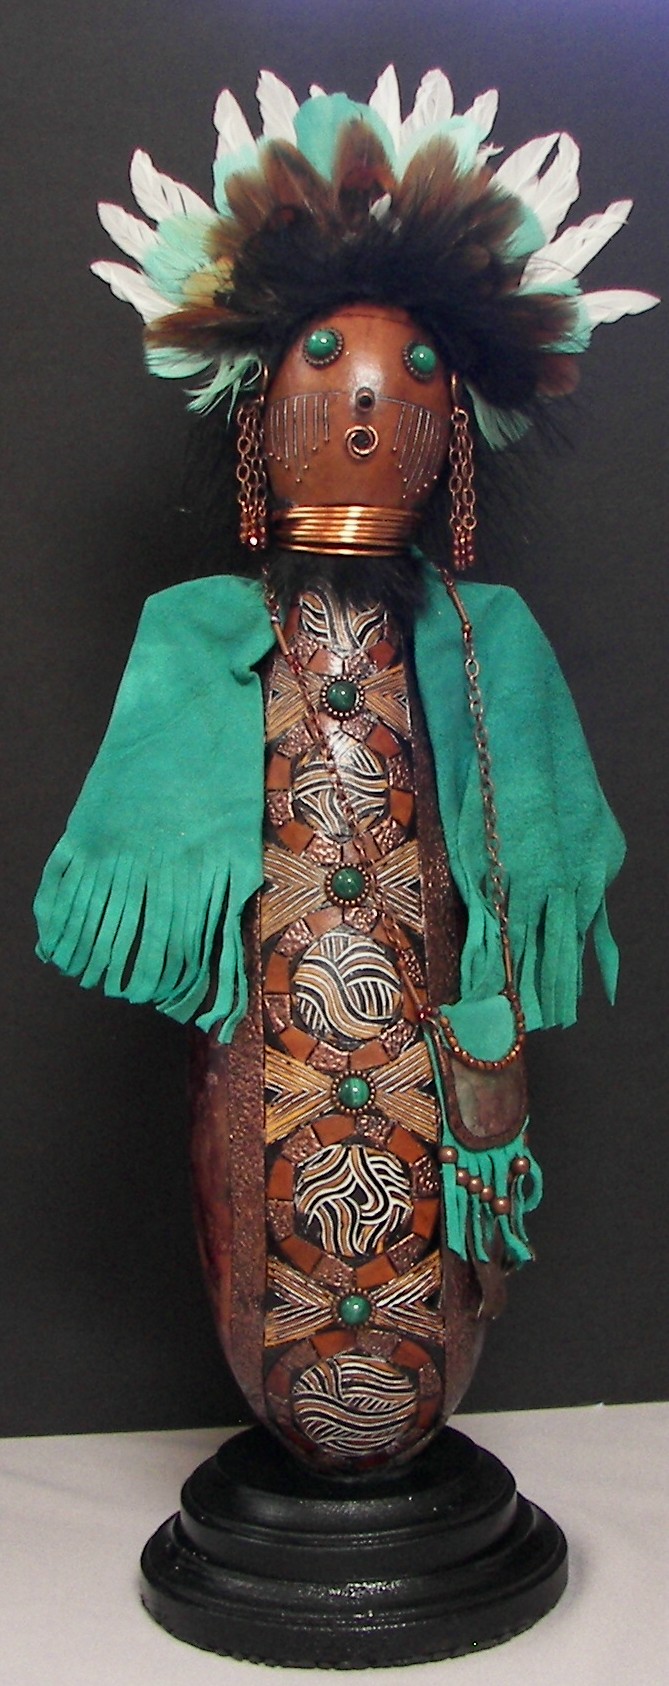 gourd-doll-with-leather-purse